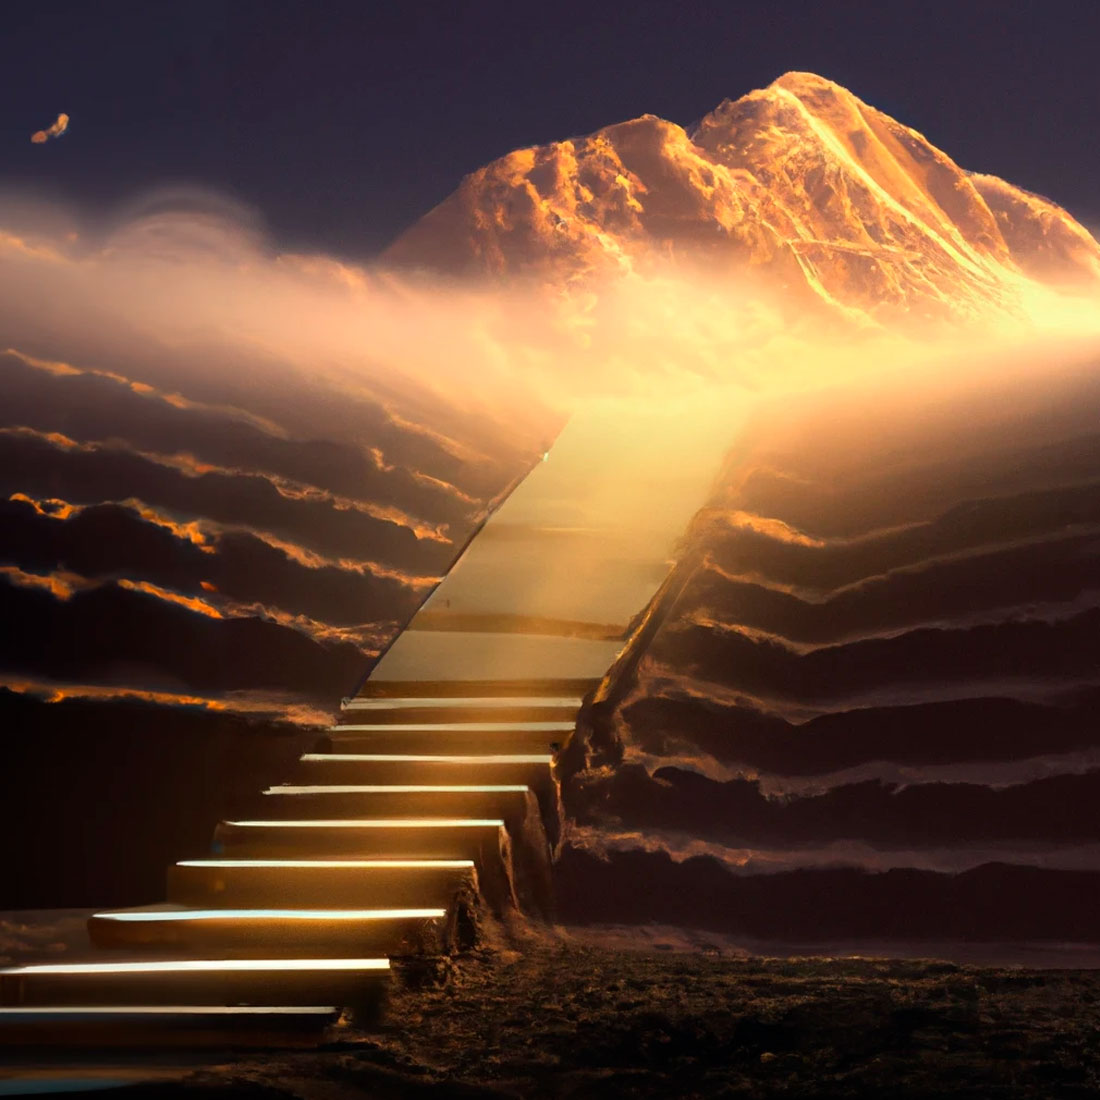 QUADRATAOK_DALL·E-2022-10-10-16.45.52—photorealistic-image-of-the-Mount-Olympus,-ethereal-light,-side-light,-sunset,-stairs-made-of-light-from-bottom-to-top